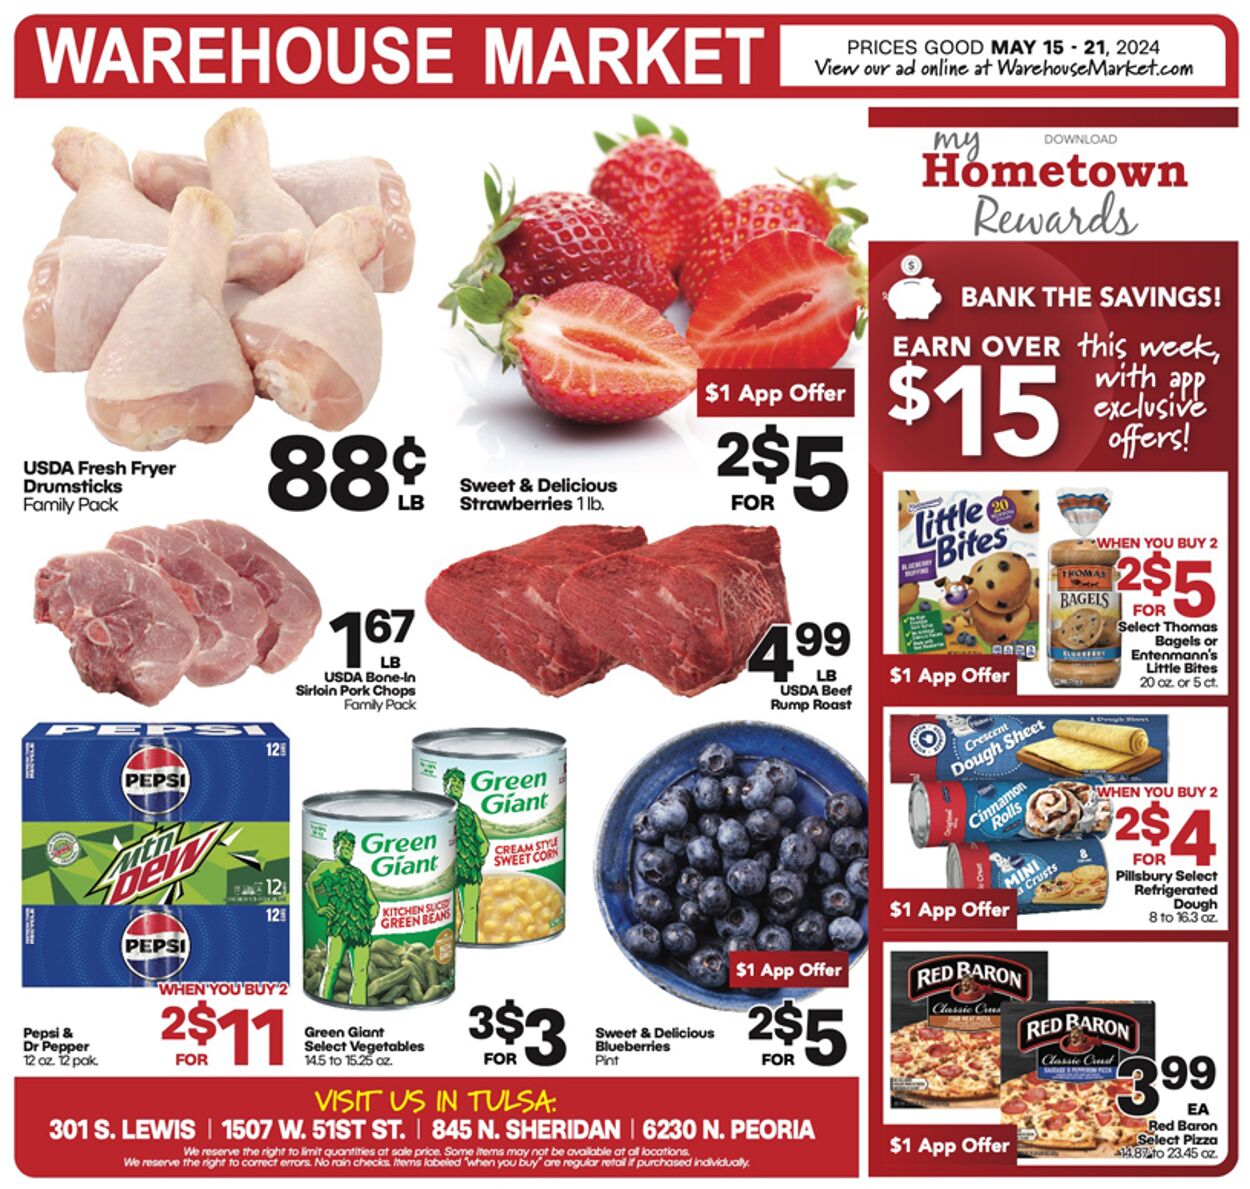 Warehouse Market Promotional weekly ads